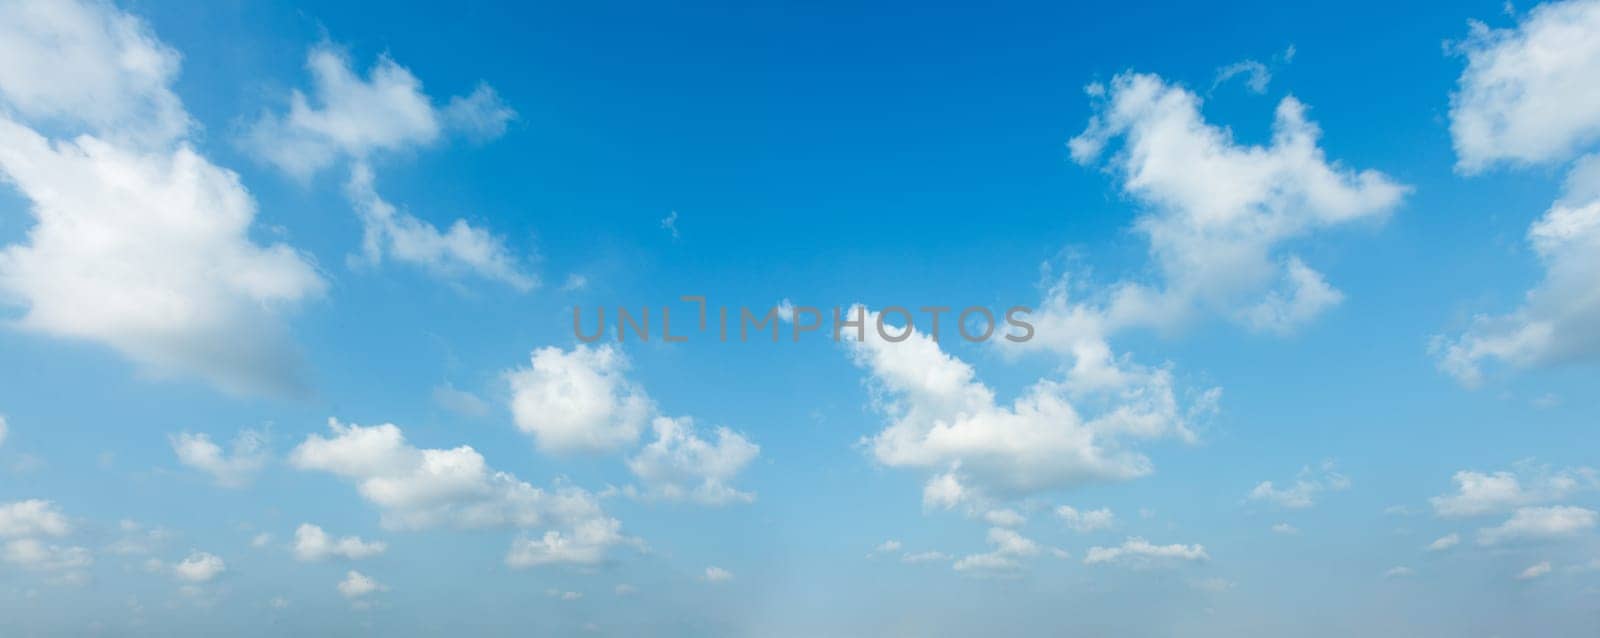 Peaceful and serene sky background by dimol